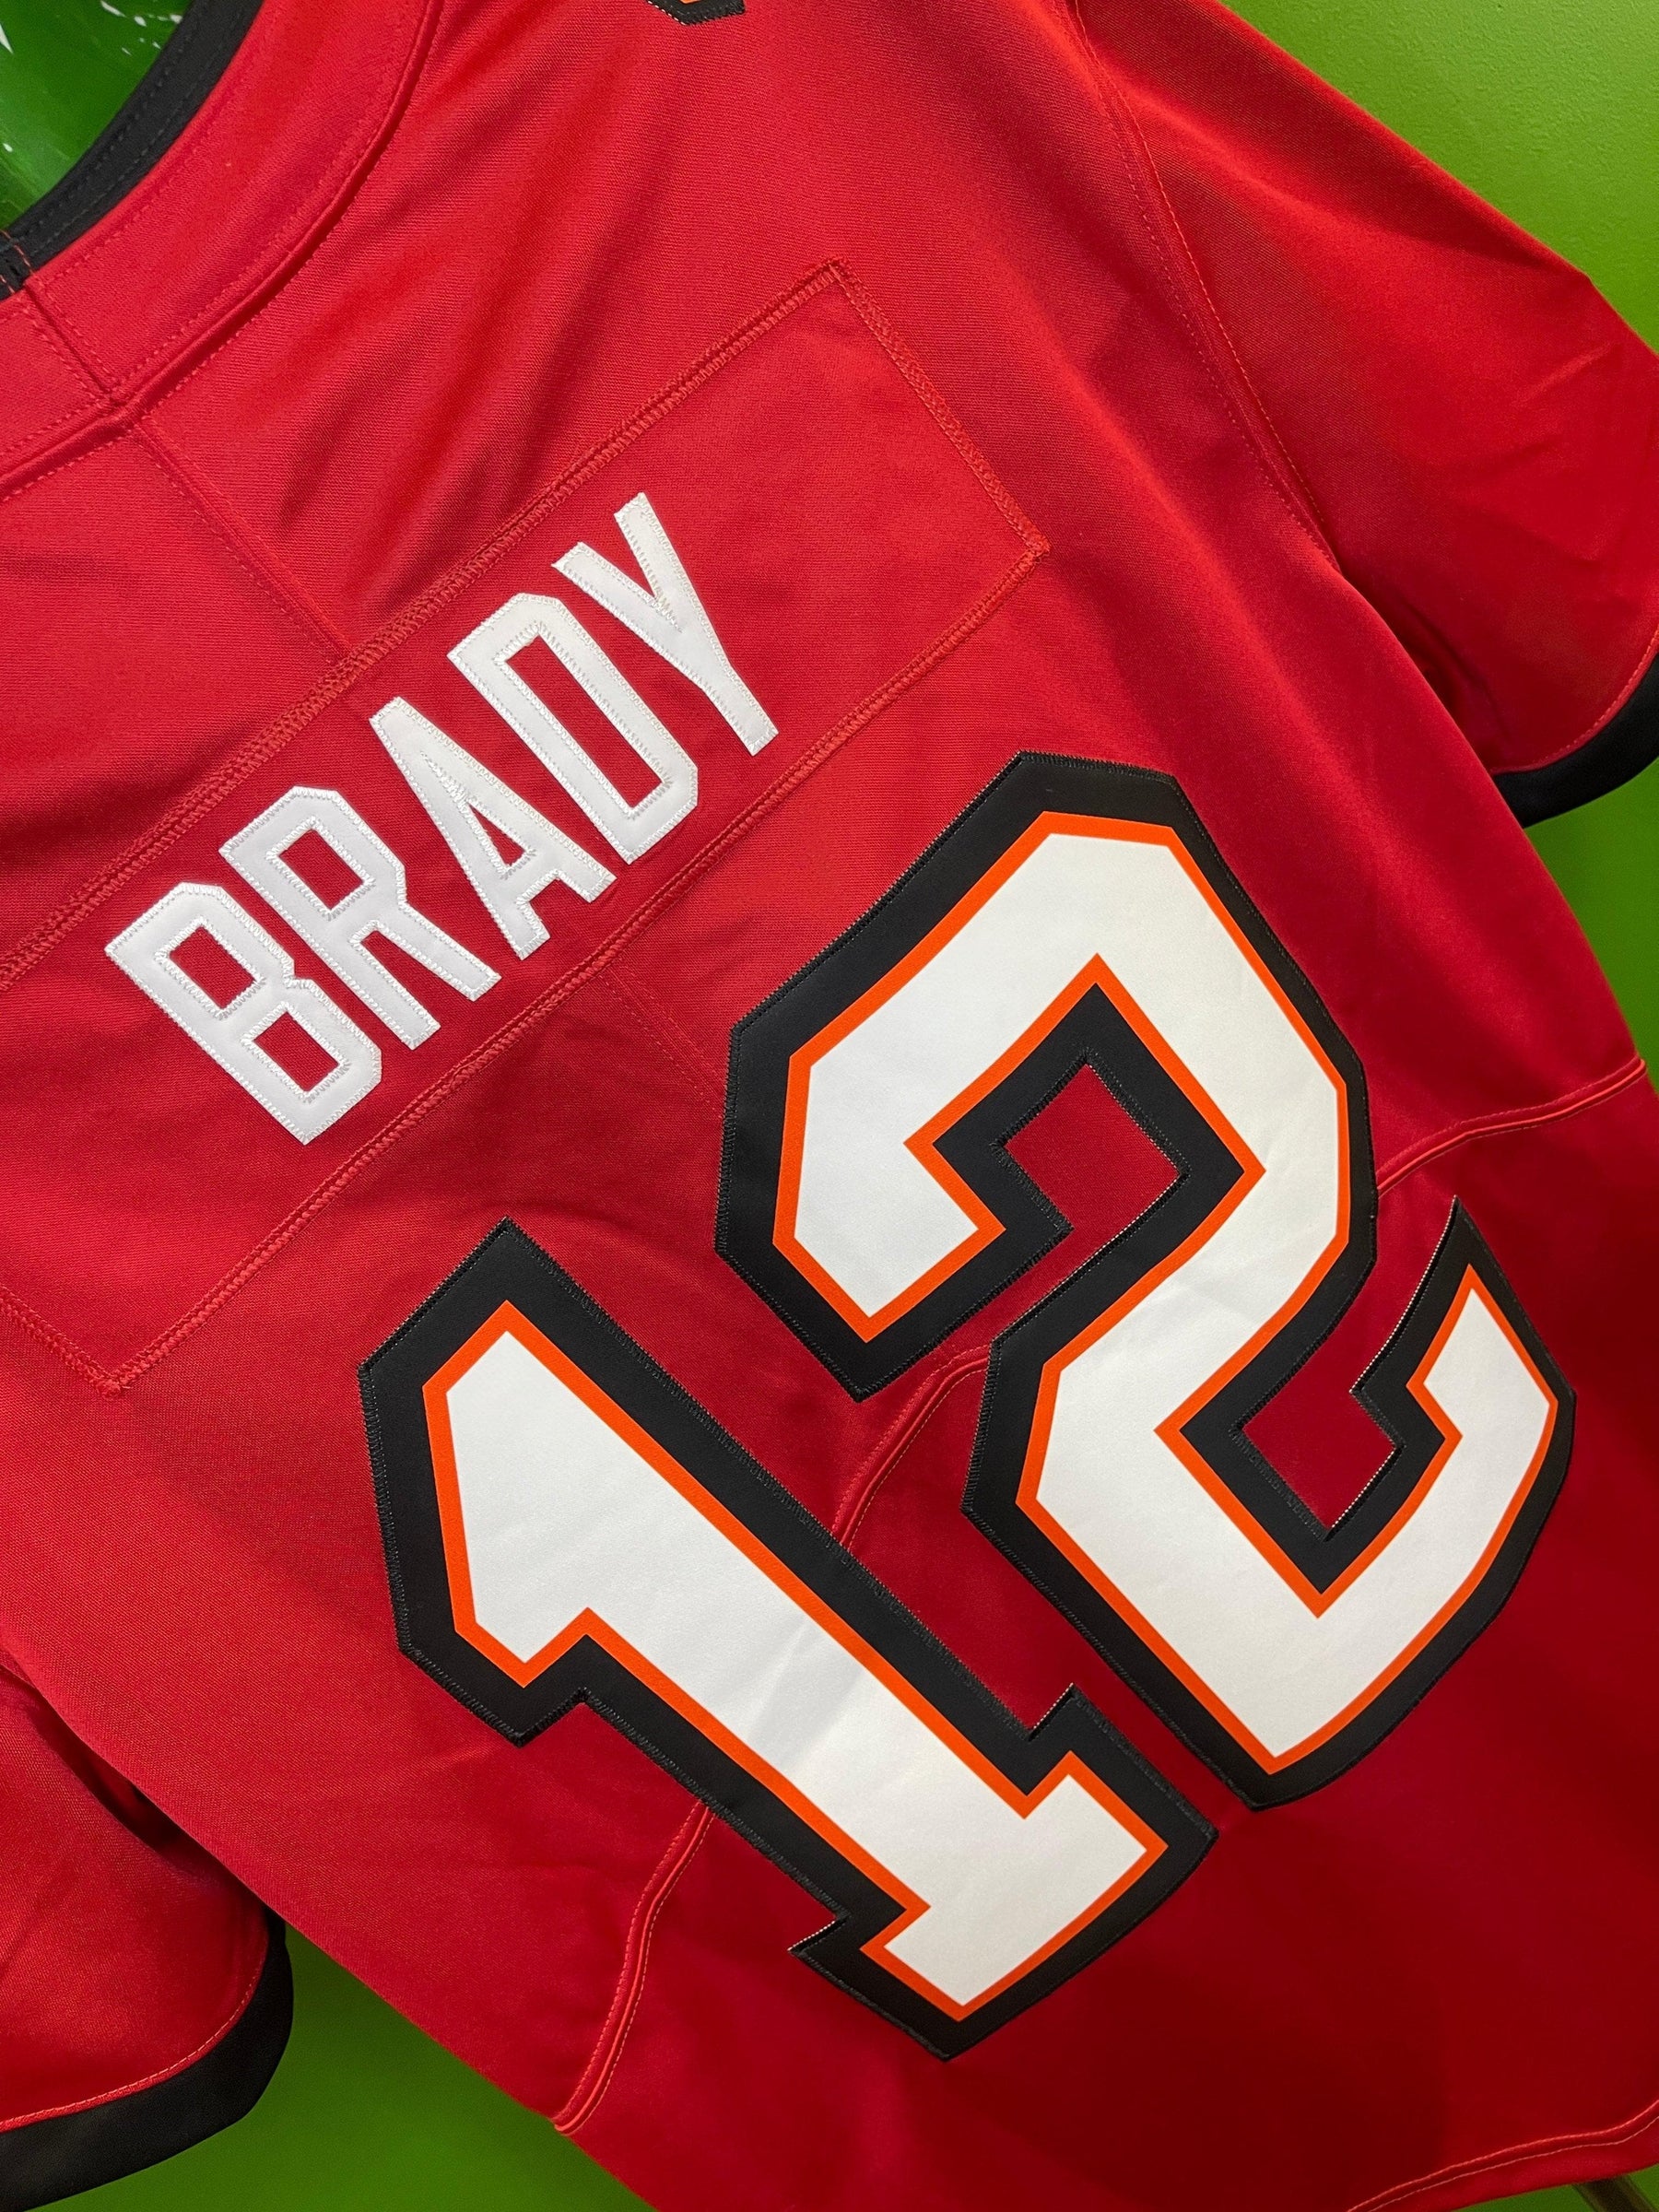 NFL Tampa Bay Buccaneers Tom Brady #12 Limited Stitched Jersey Men's Large NWT